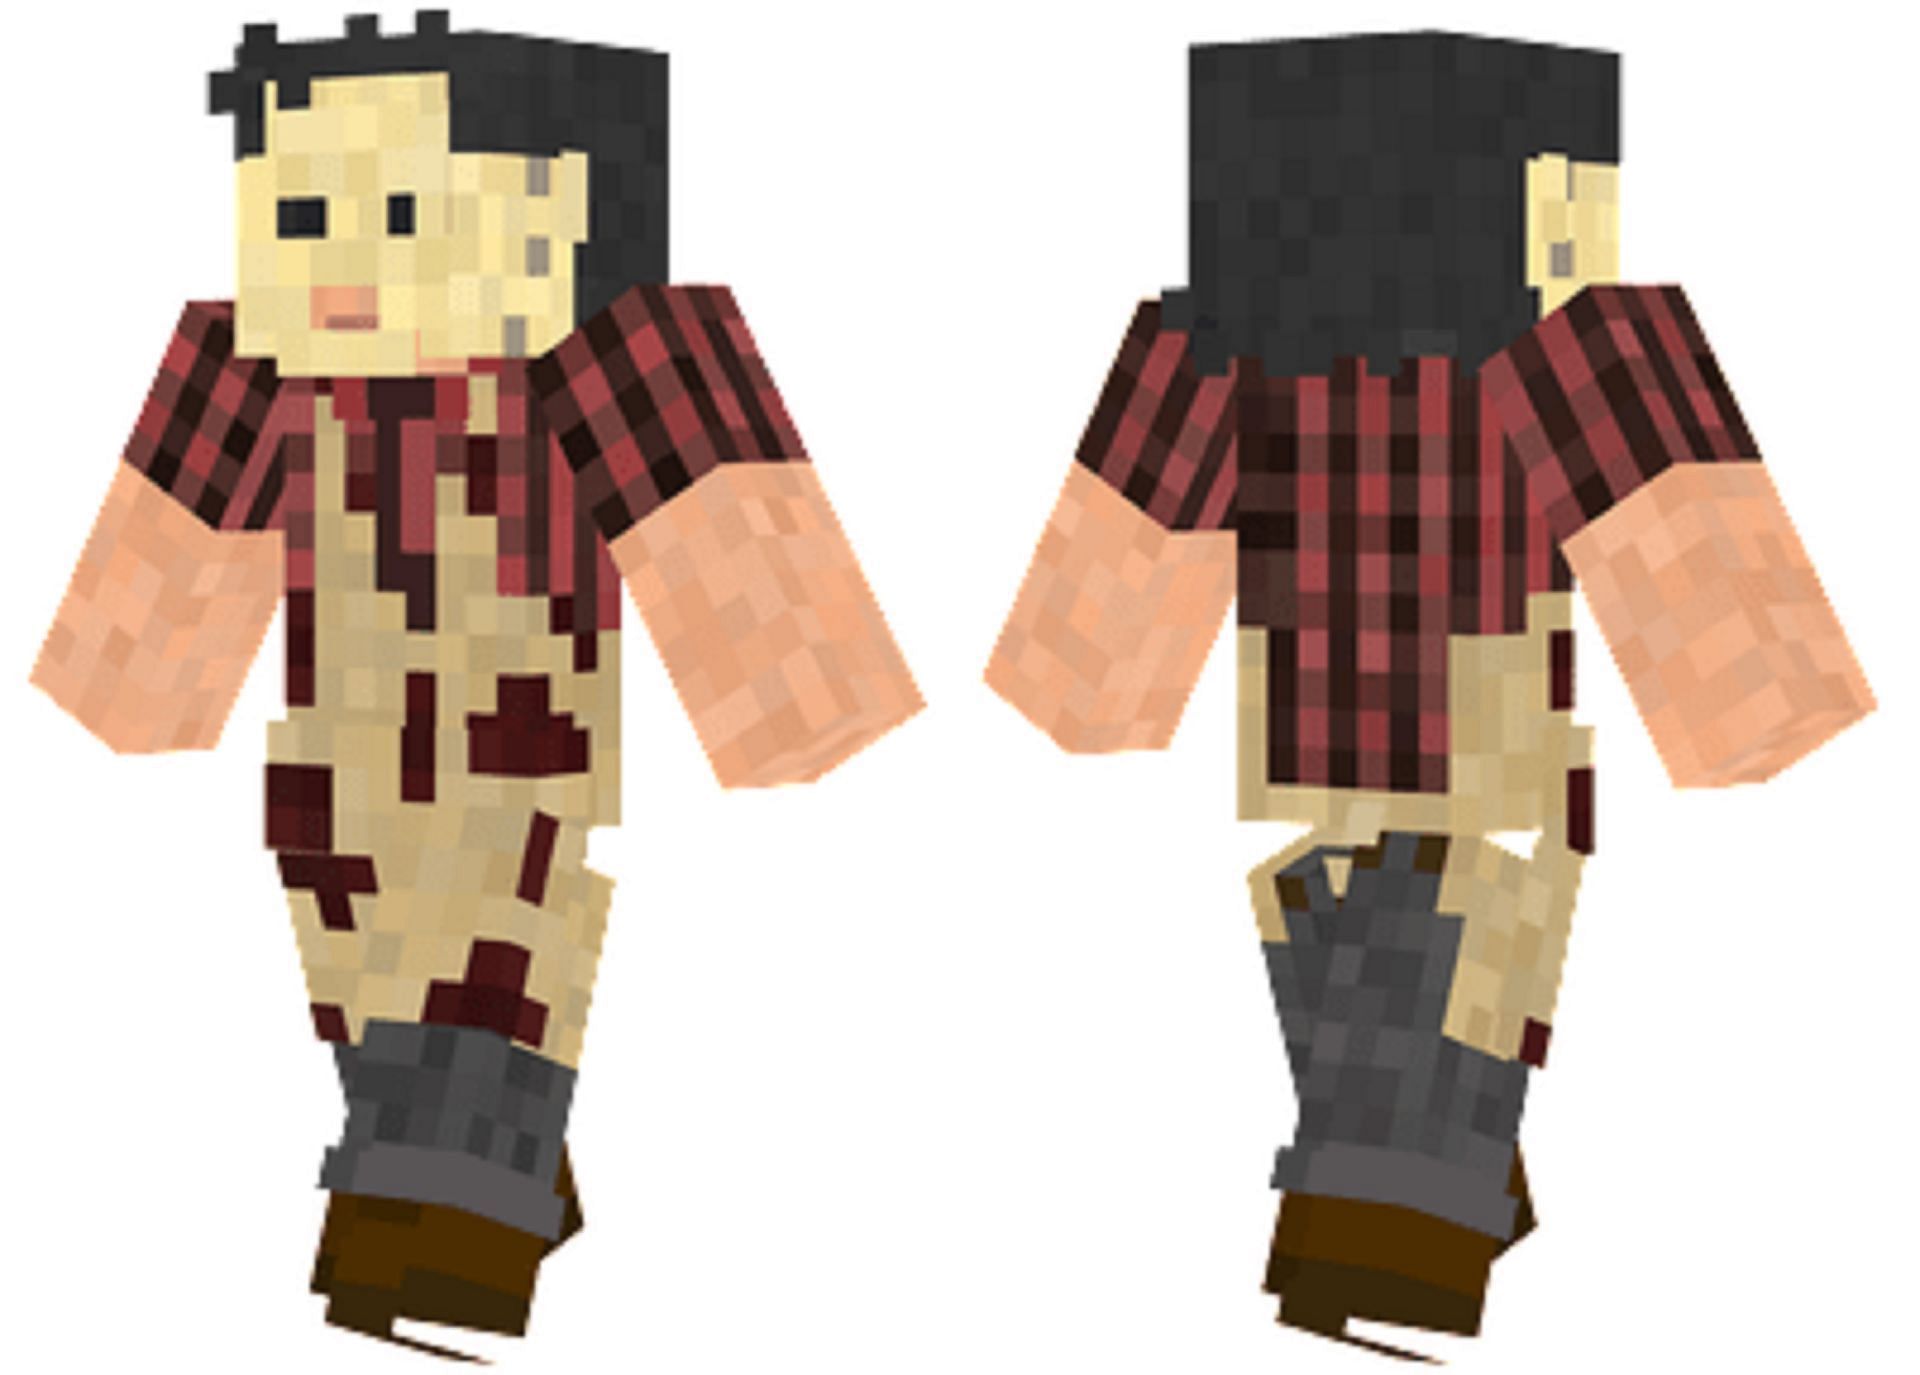 This version of Leatherface was featured as a Mortal Kombat X variant (Image via Demetrius/MinecraftSkins.net)